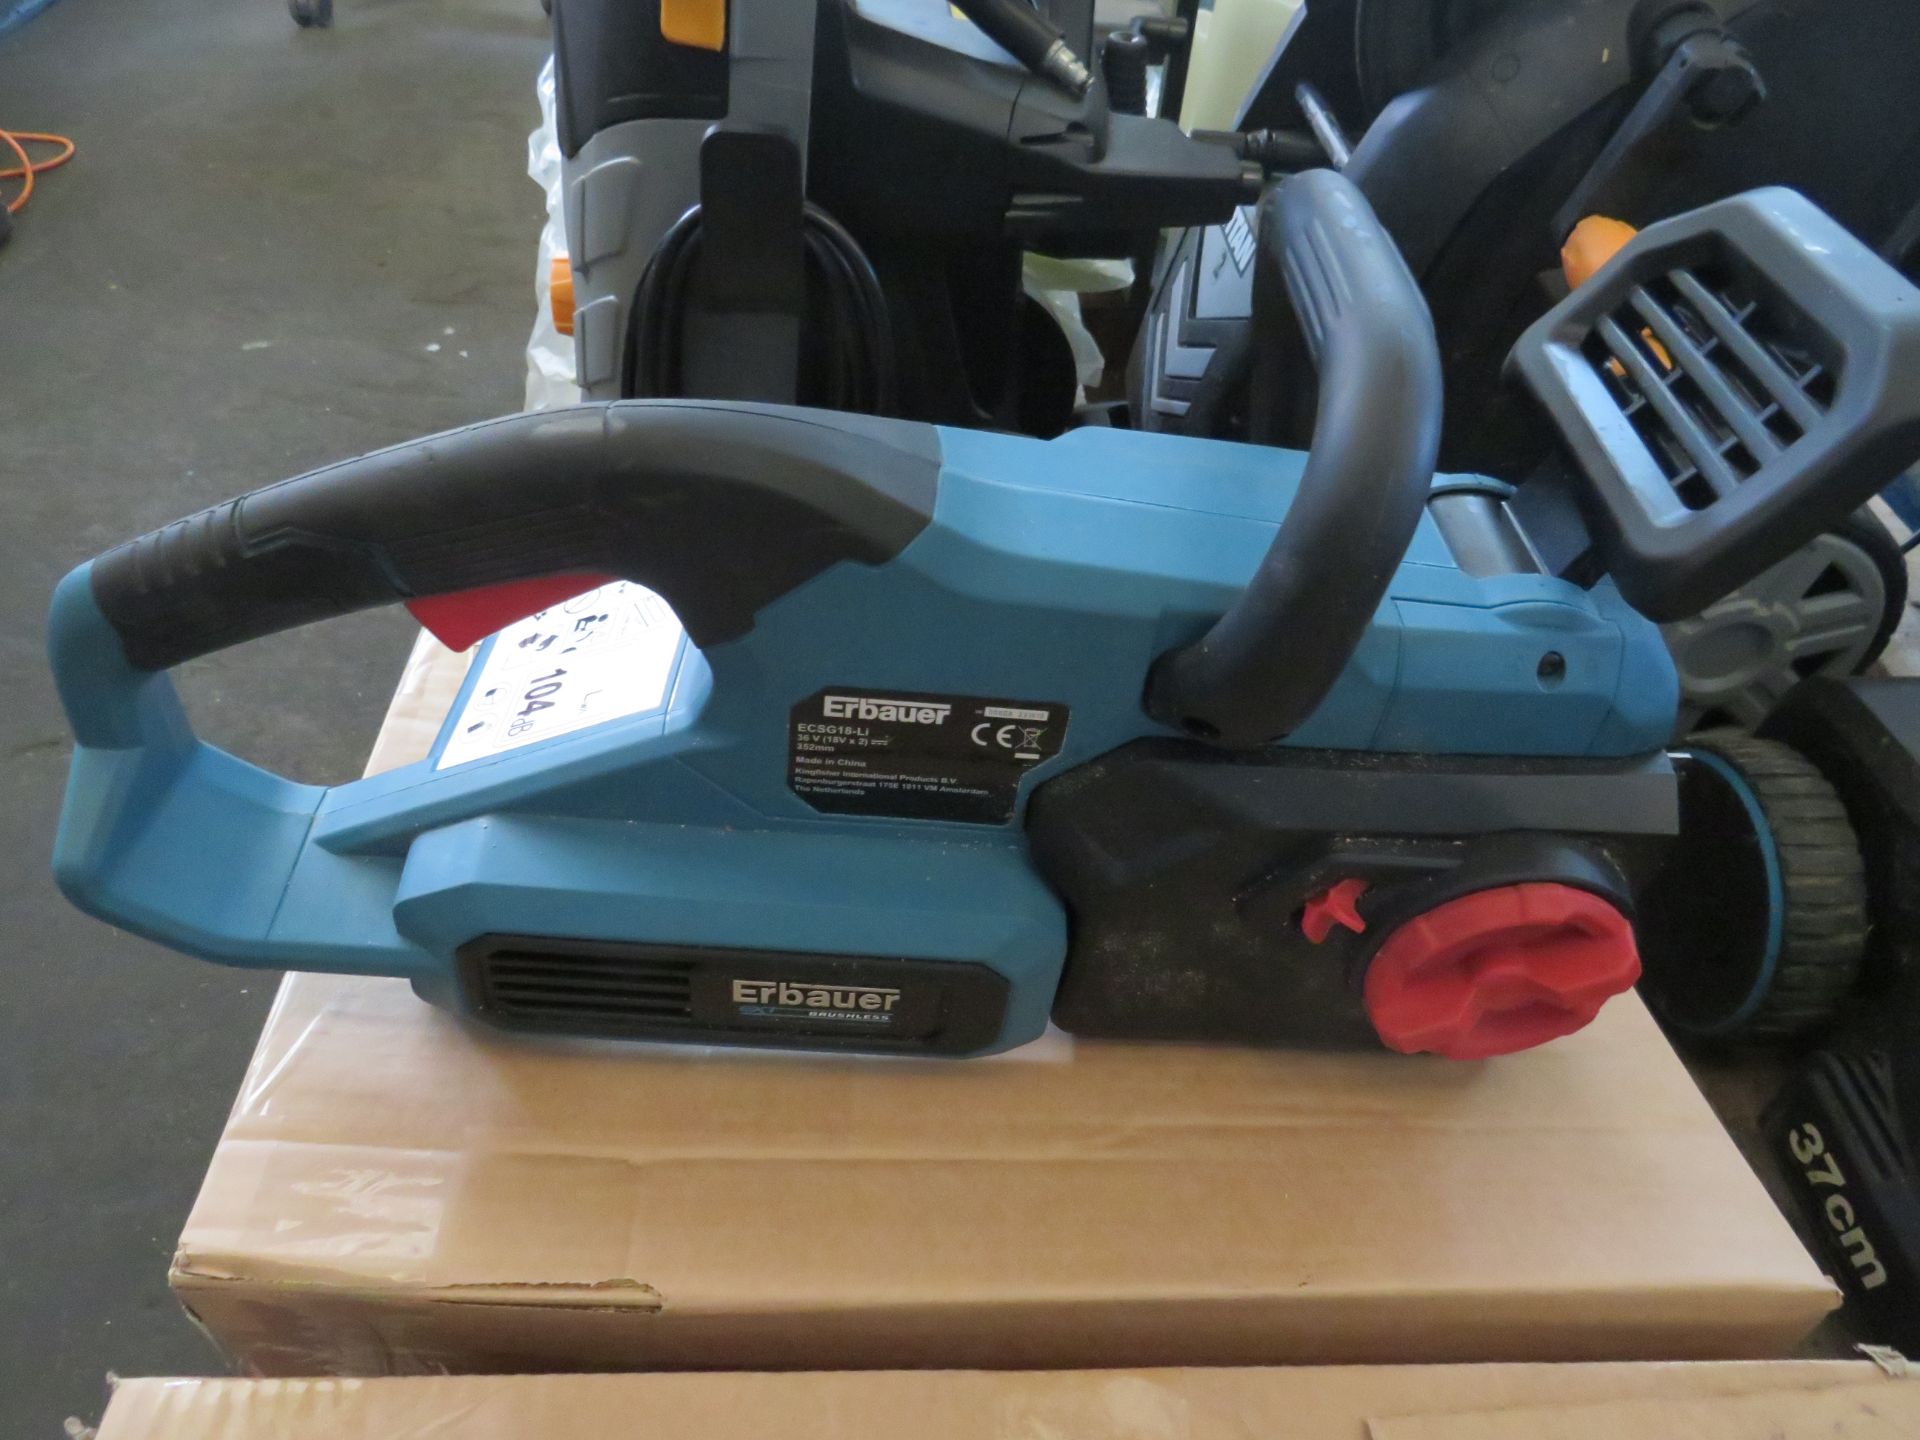 Erbauer - ECSG2x18v 352mm Cordless Chinsaw - No Batteries Present, Used Condition, Viewing